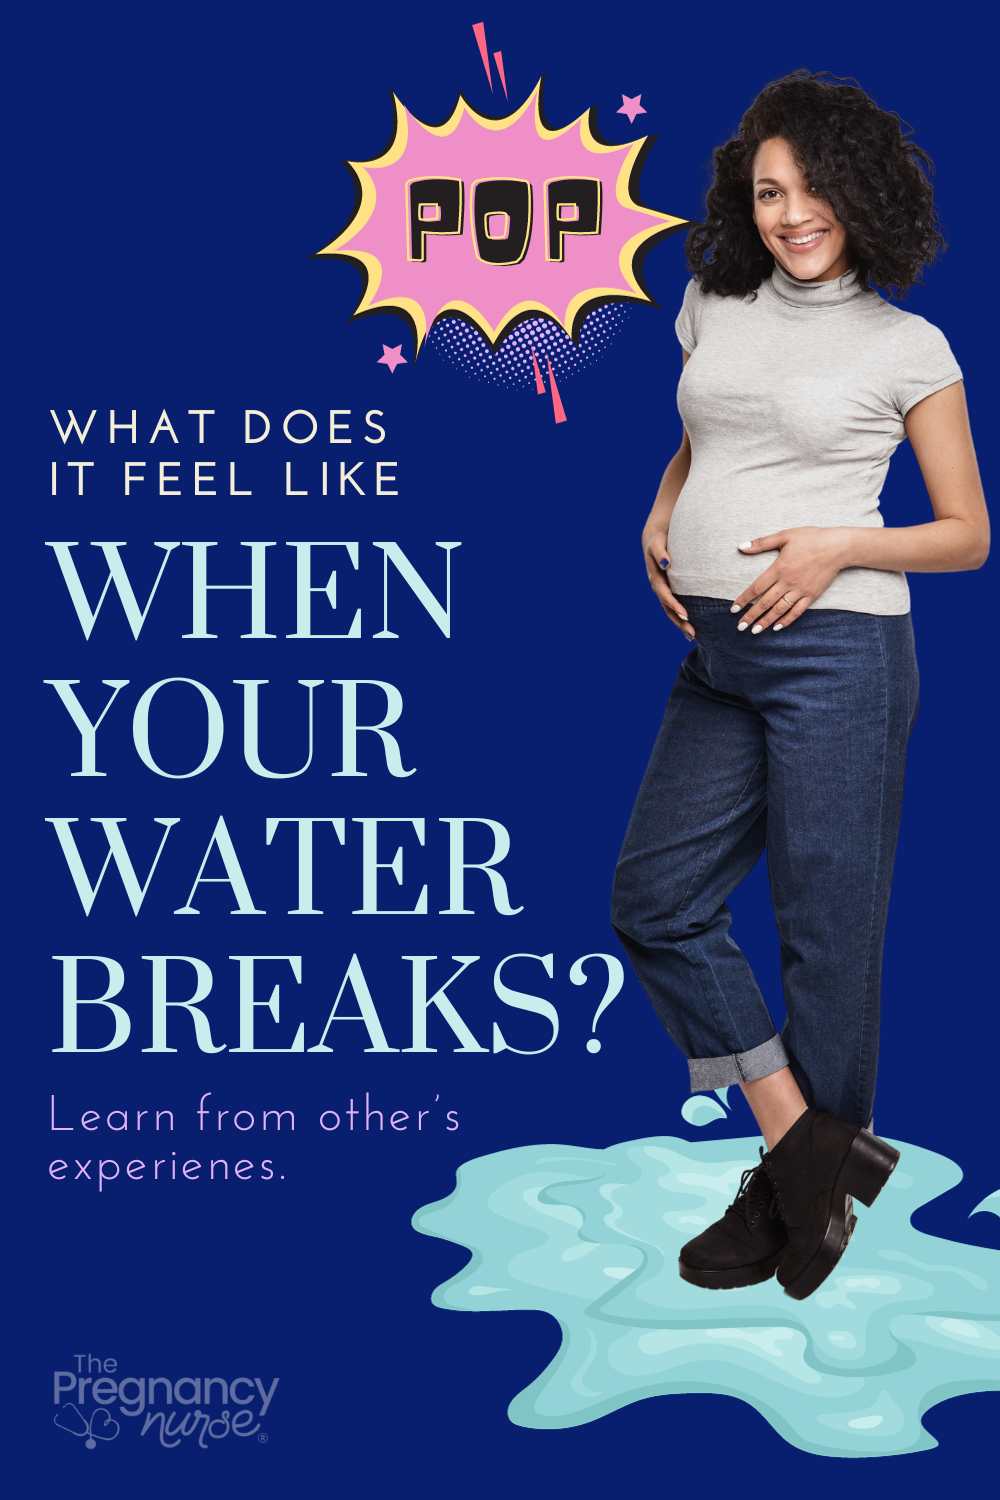 Eclamation POP: pregnant woman standing in a puddle. / what does it feel like when your water breaks? Experience from others. via @pullingcurls